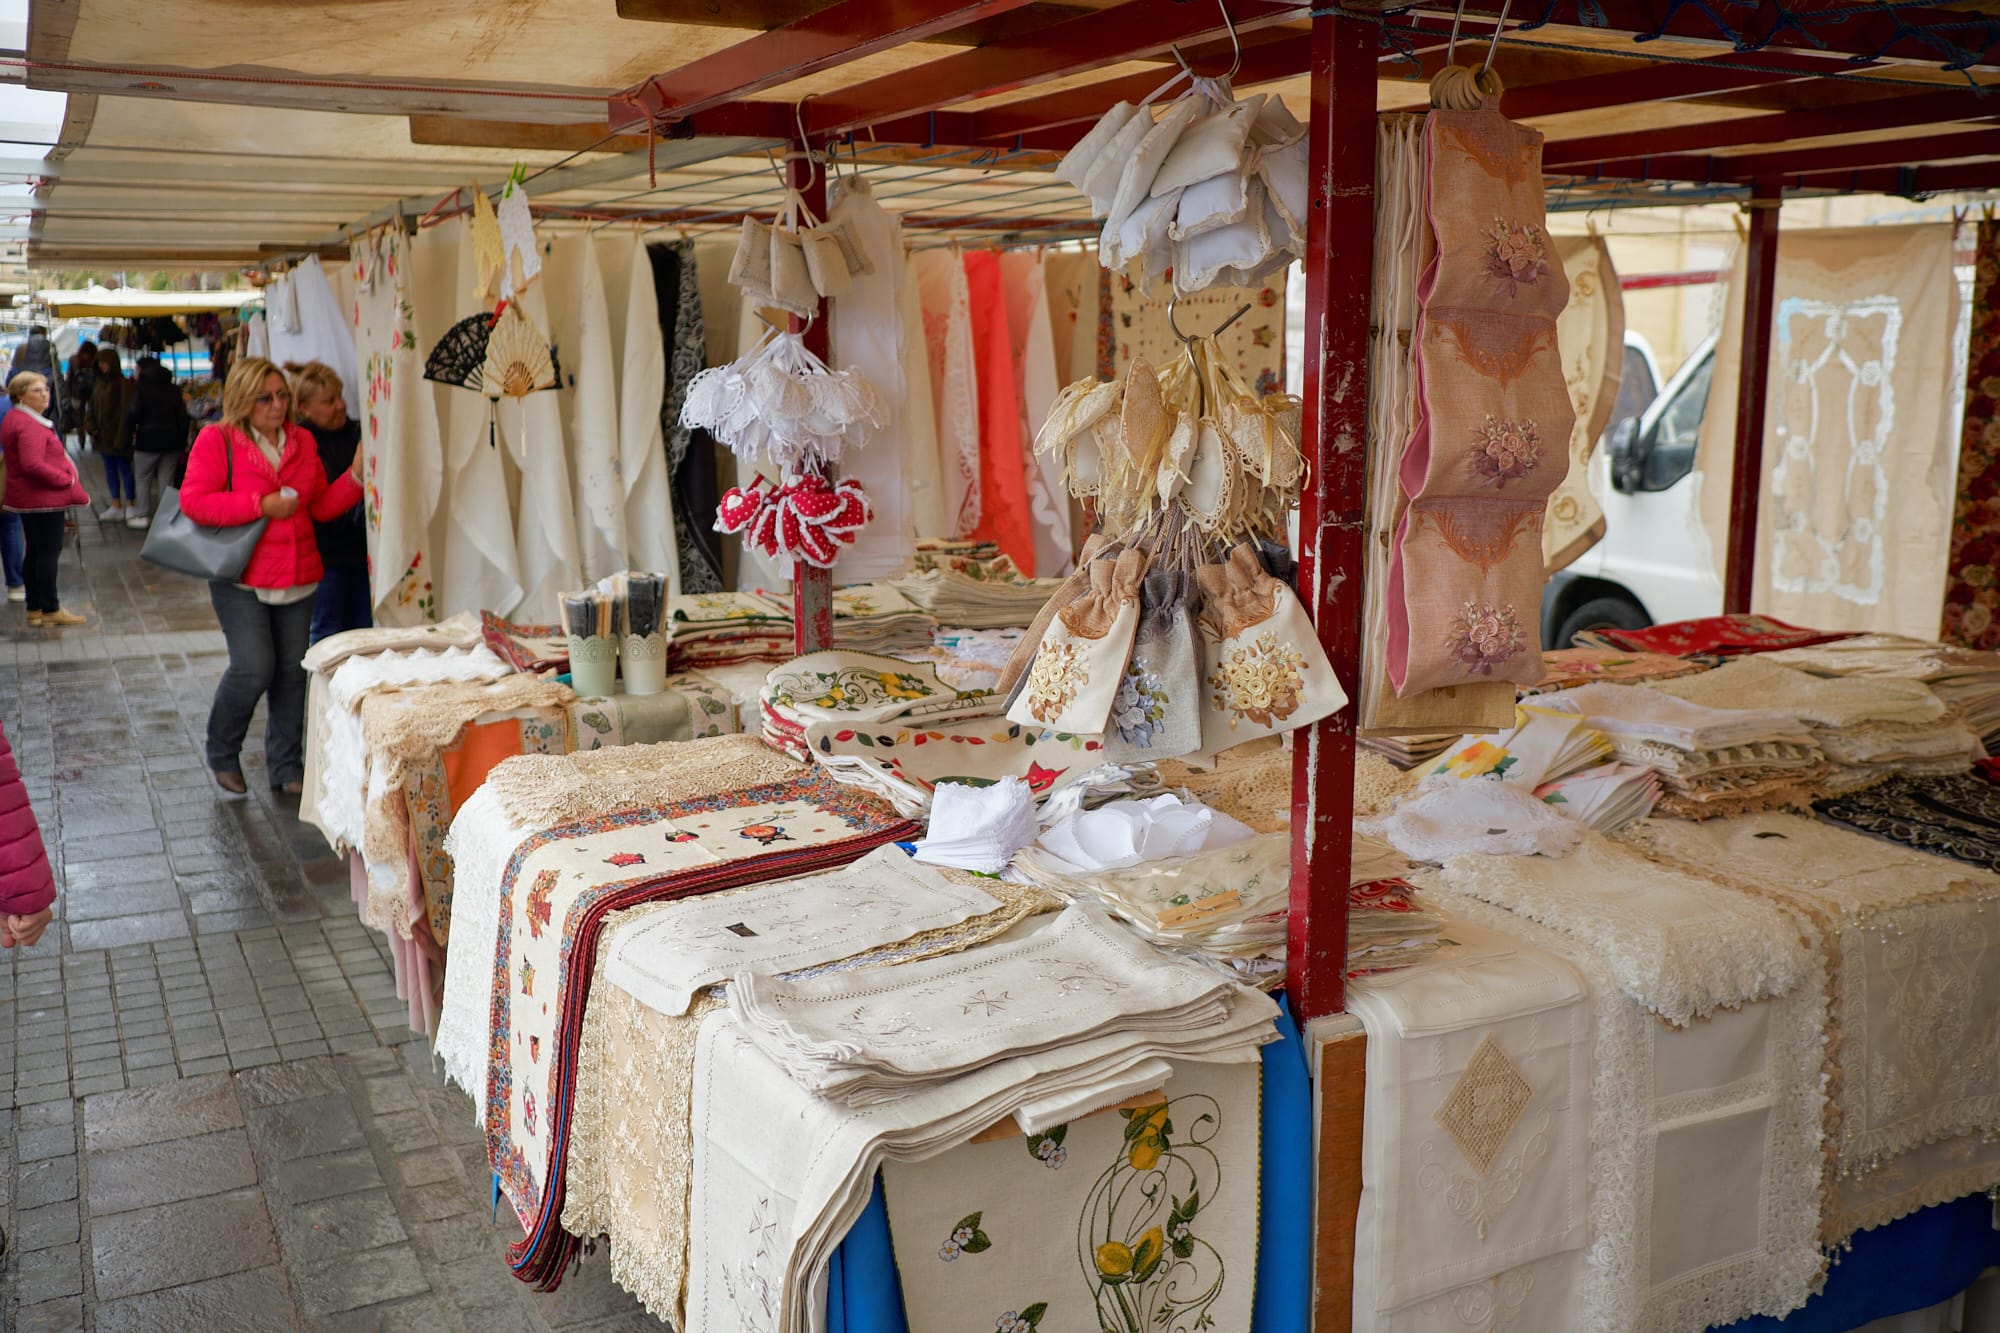 market stall selling cloth goods